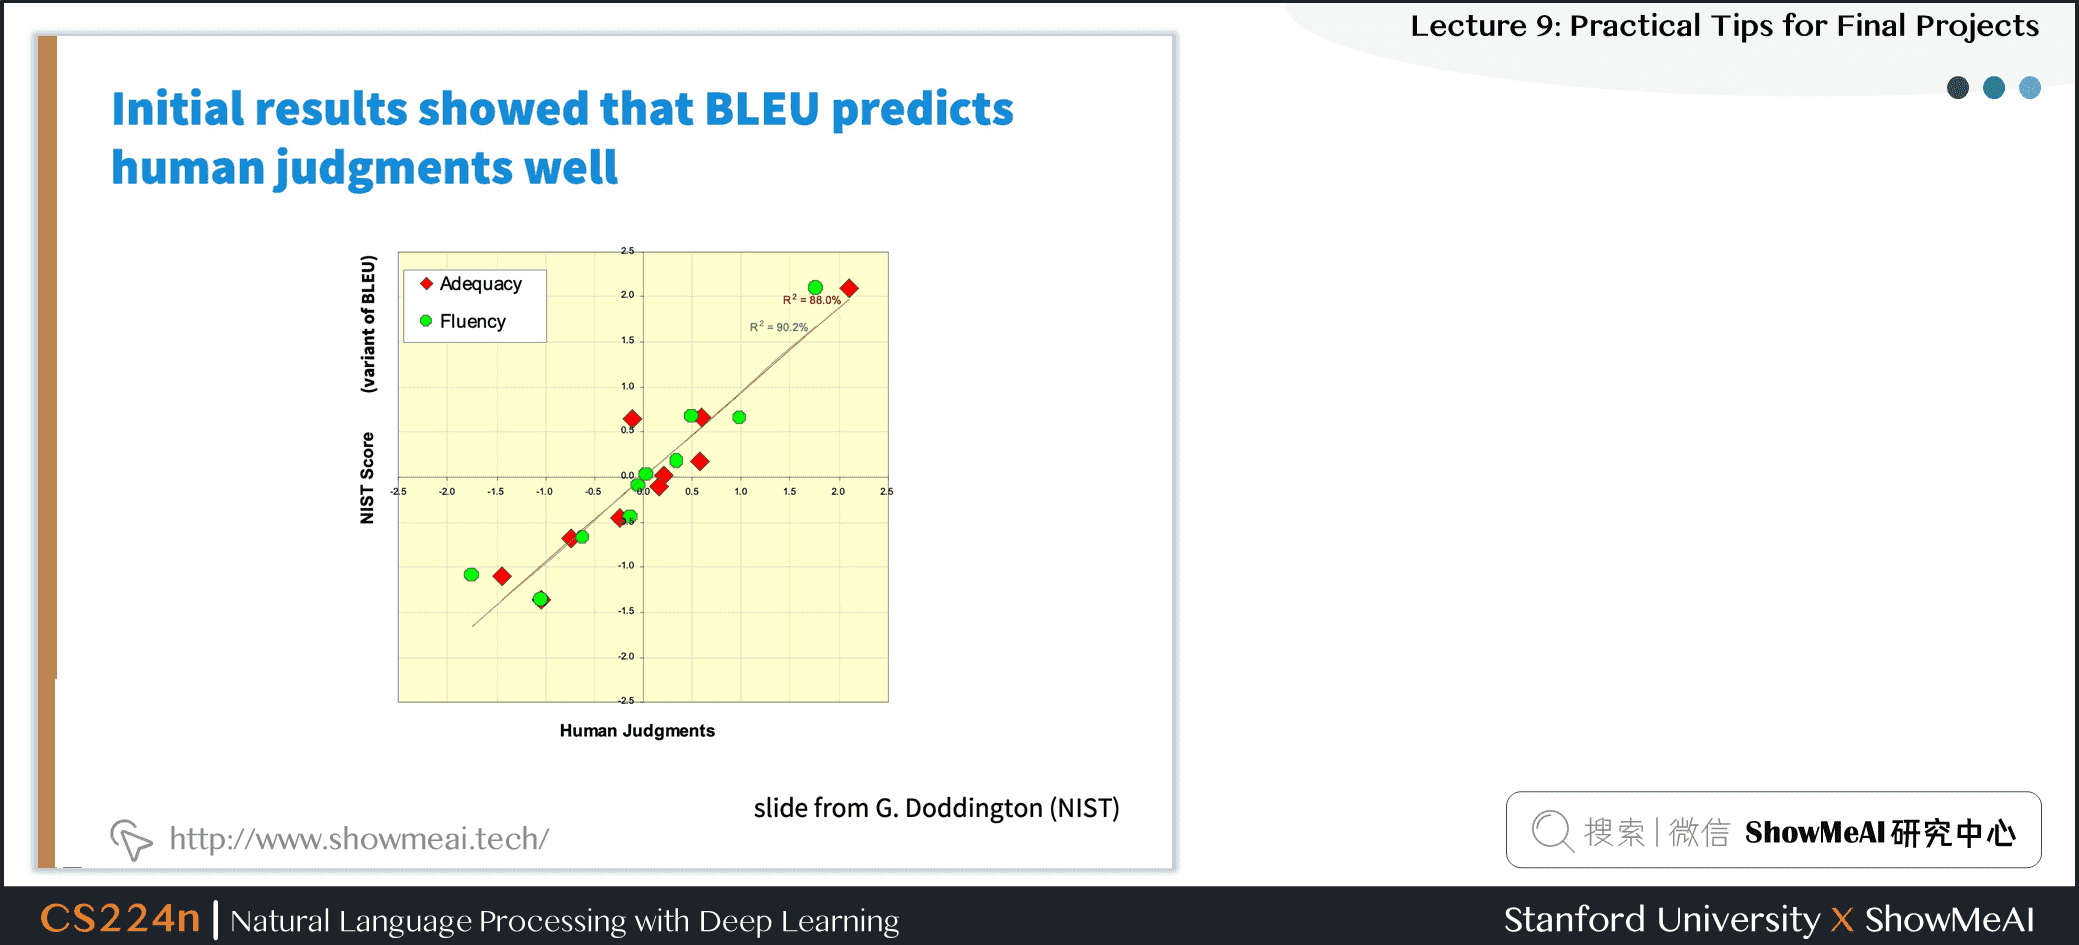 Initial results showed that BLEU predicts human judgments well